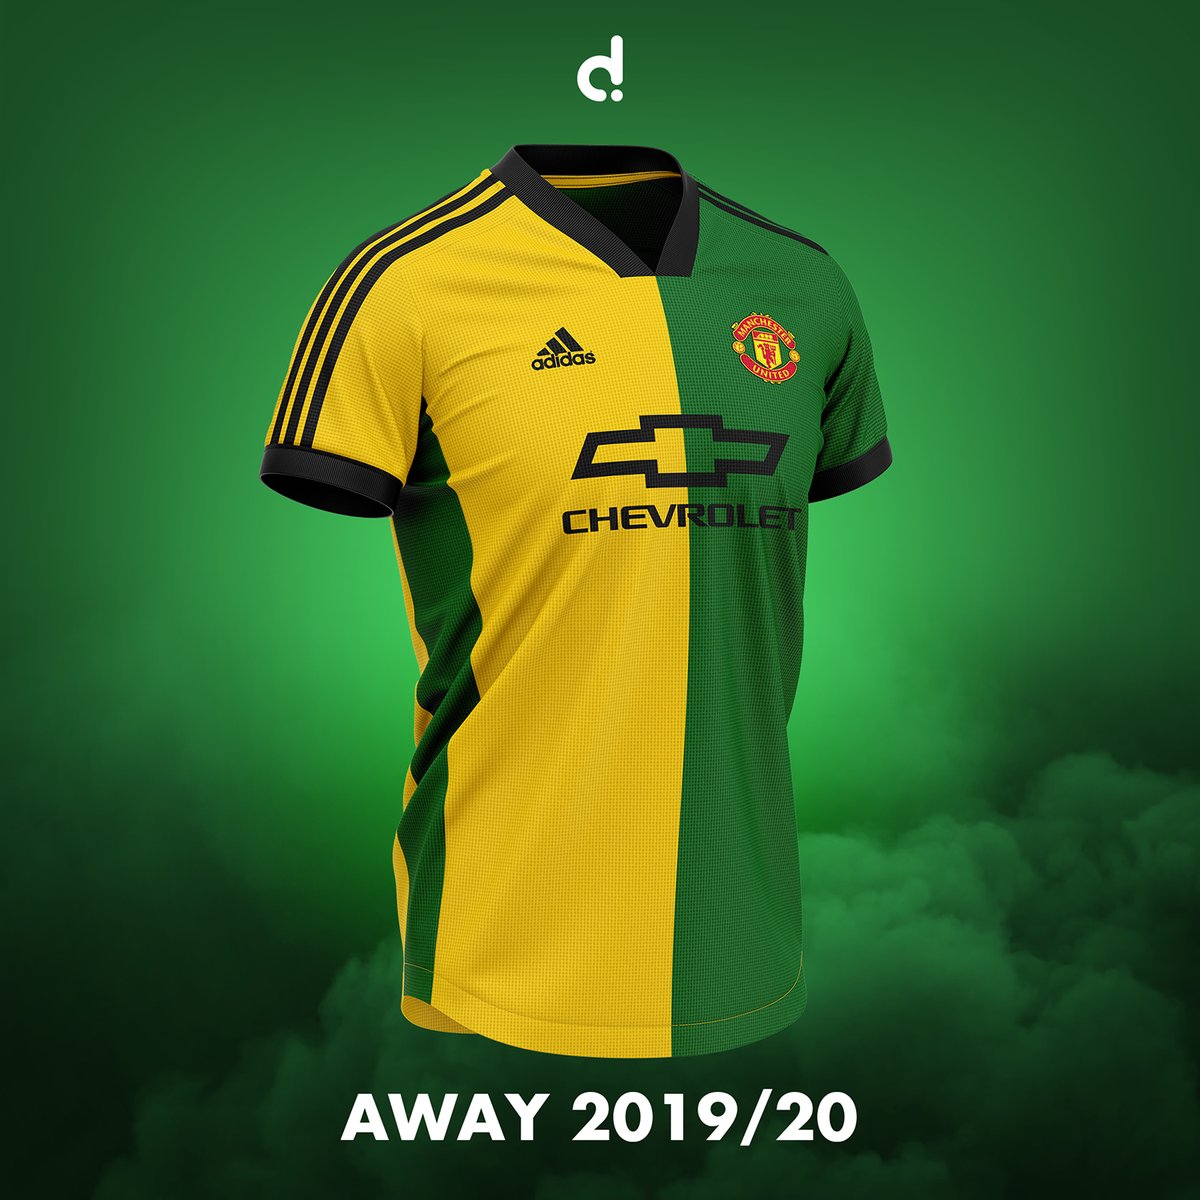 manchester united jersey green and yellow